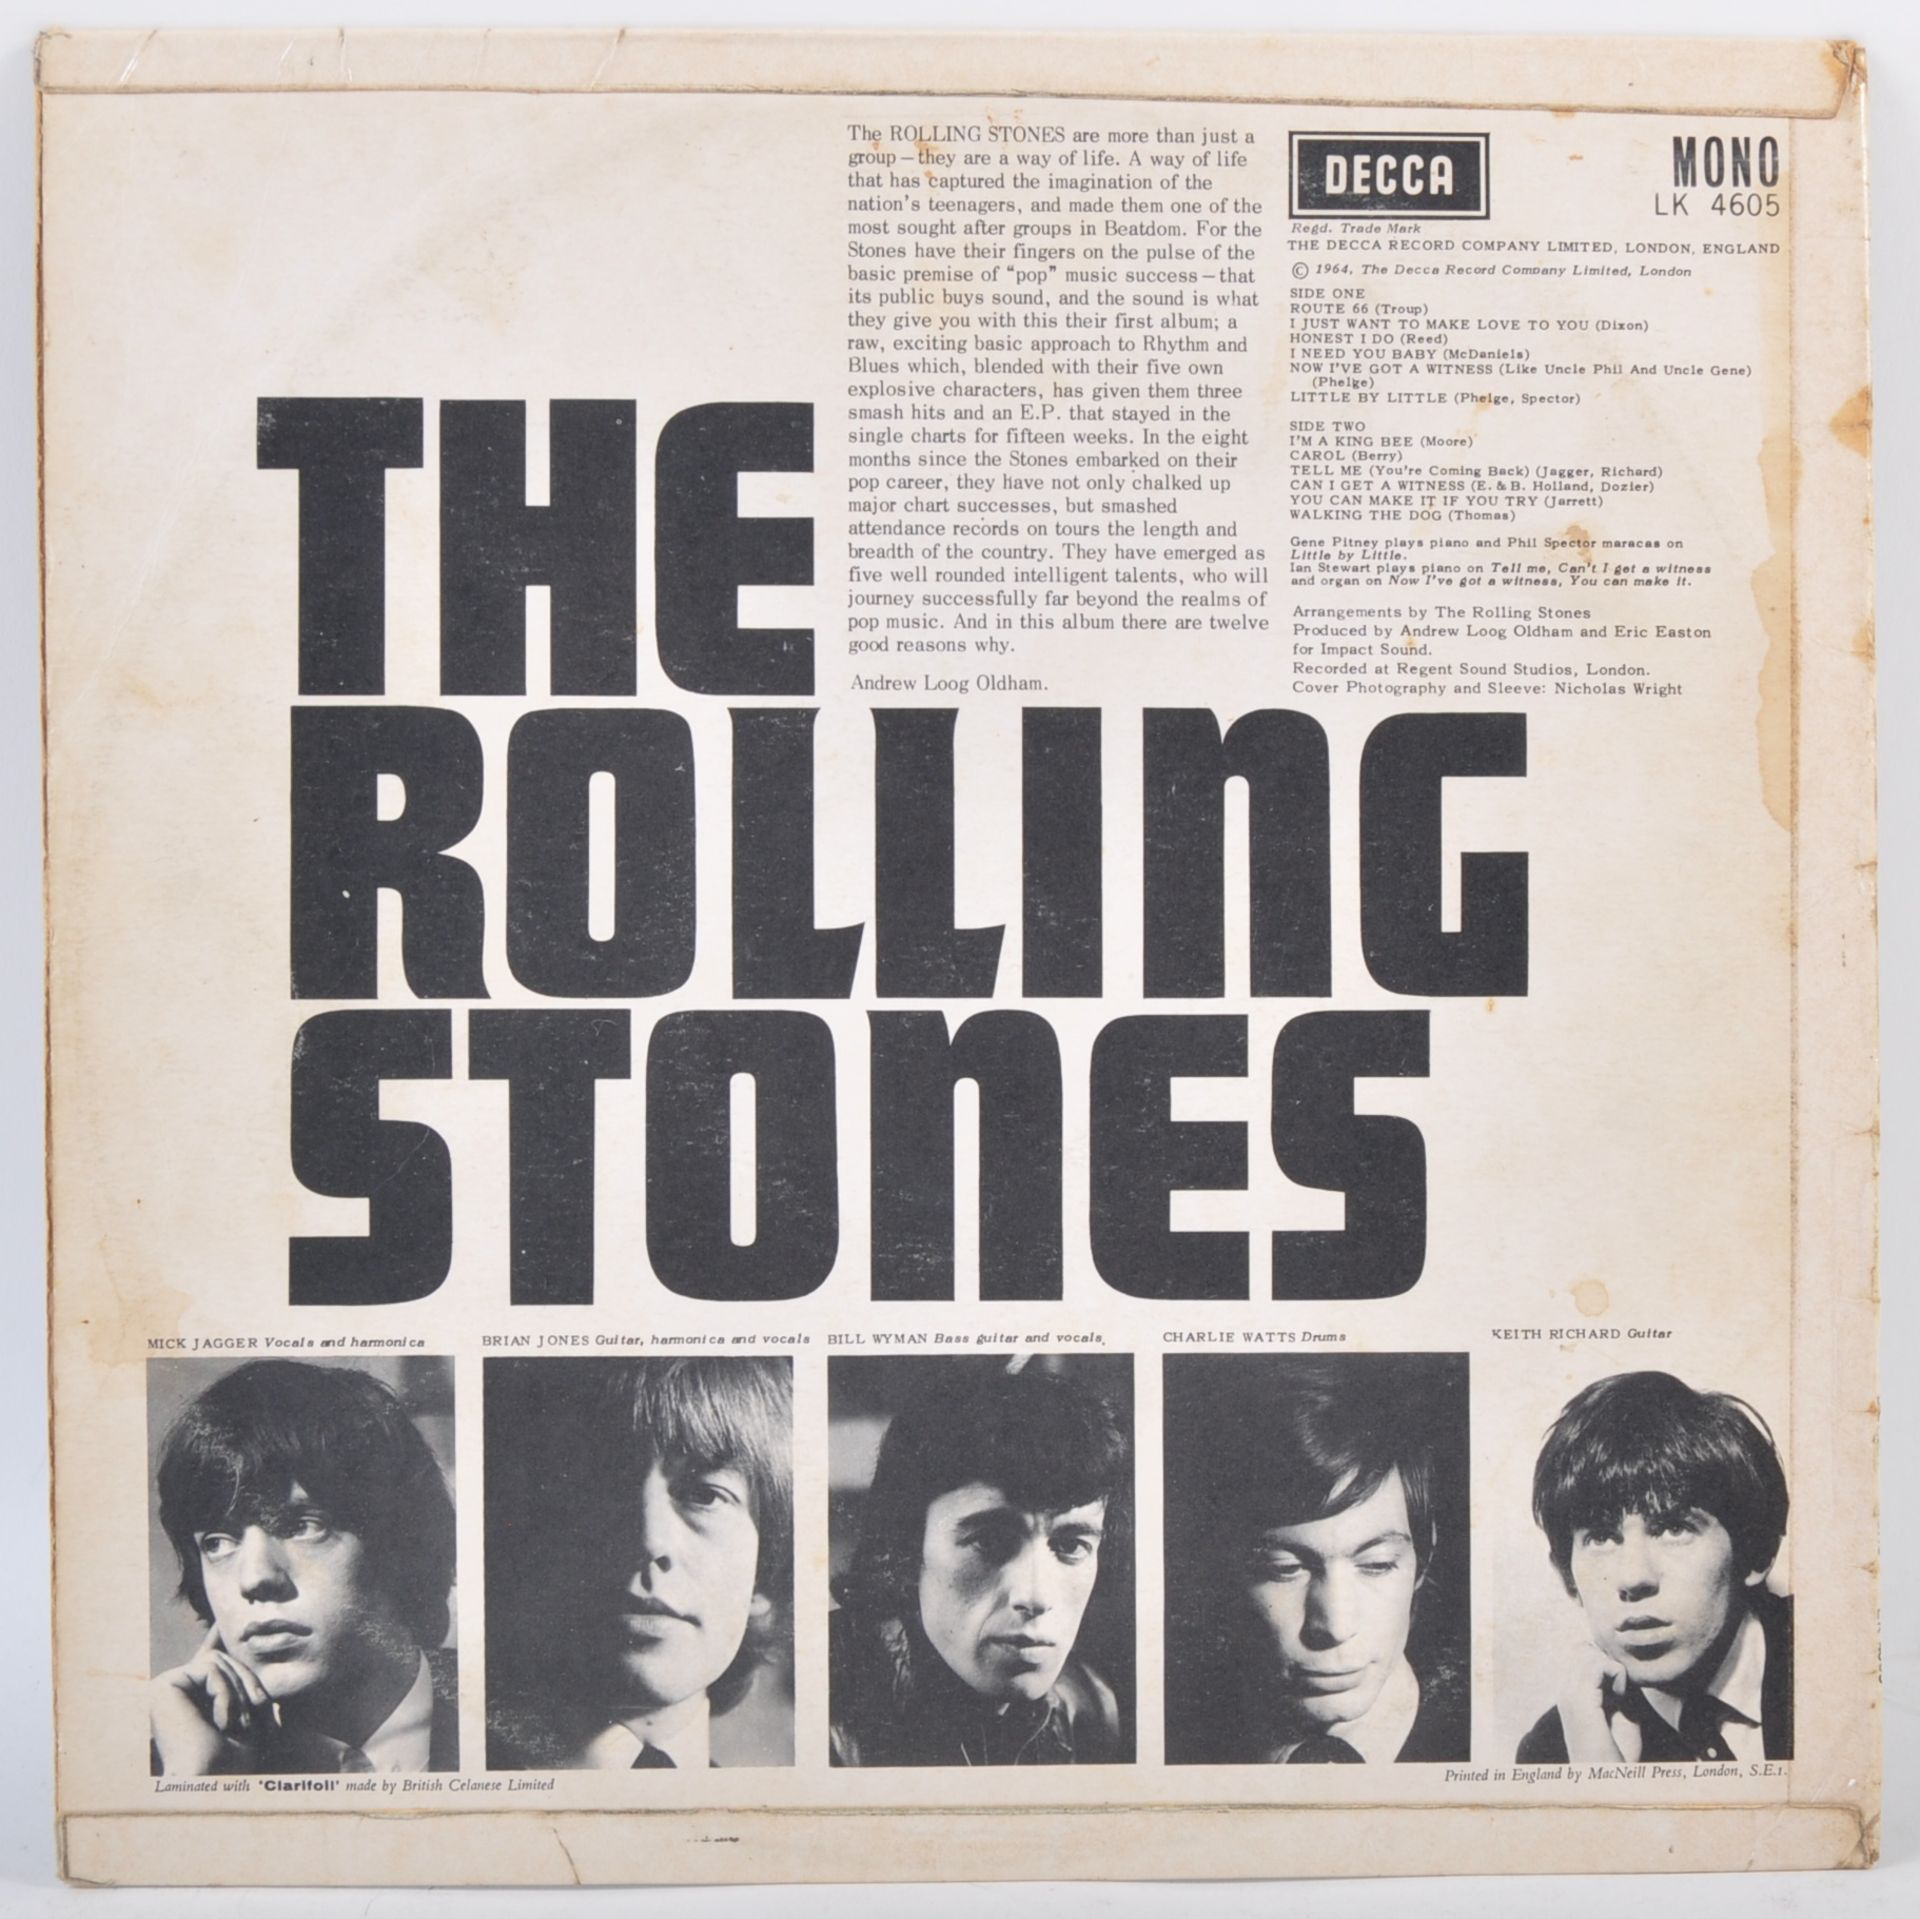 THE ROLLING STONES FIRST ALBUM - 1964 DECCA RELEASE - Image 2 of 4